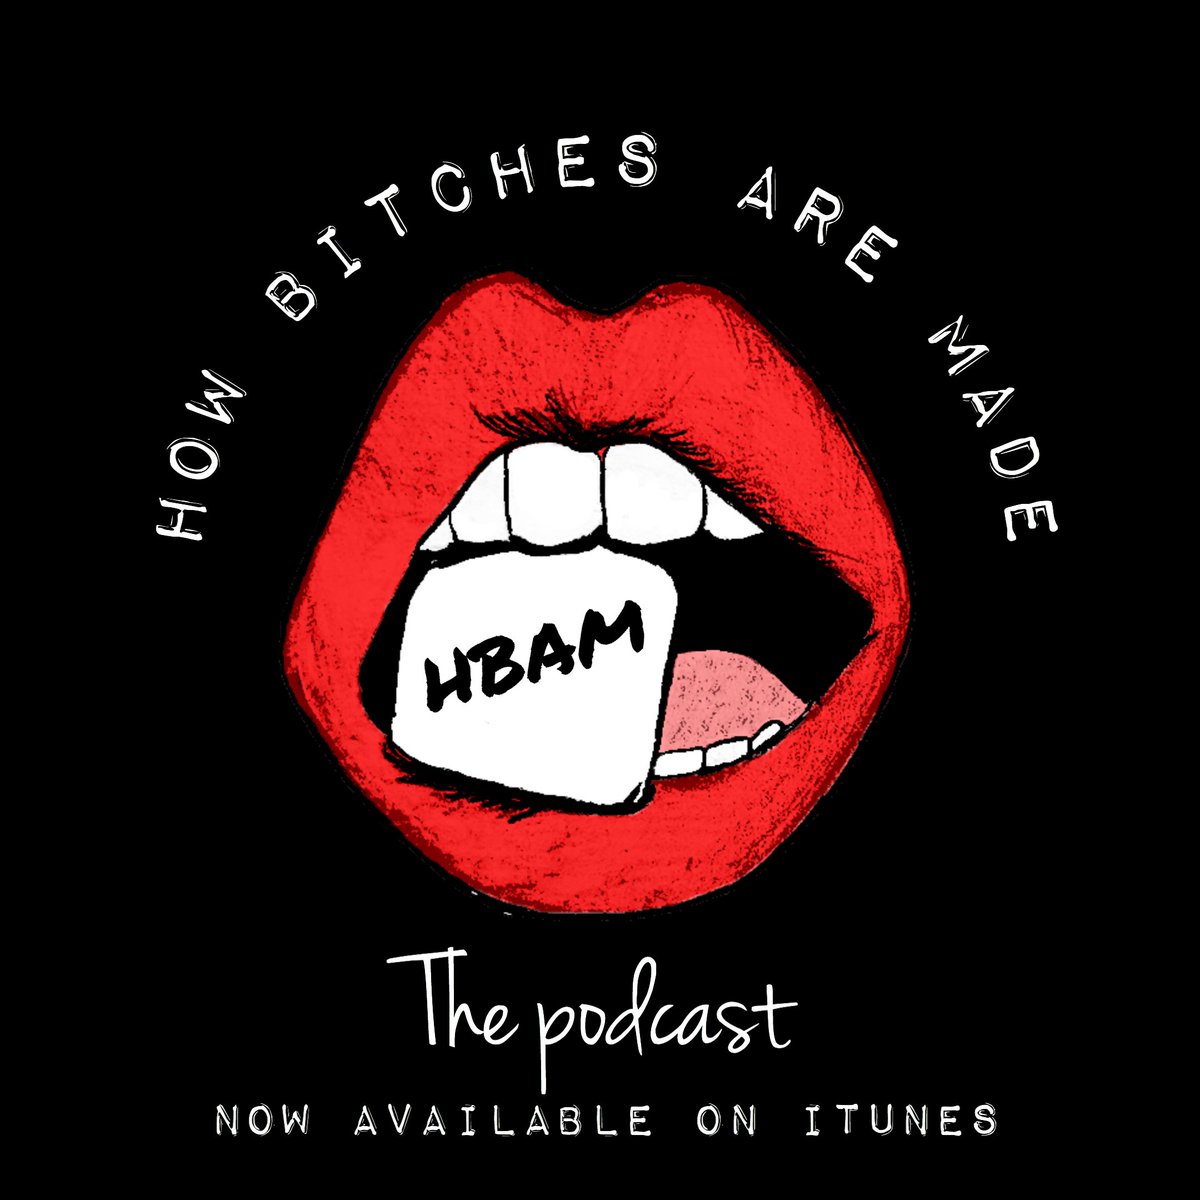 It's #LaborDay so, it only seemed fitting I release the fruit of my ten year labor of love today. The first three episodes of the #HowBitchesAreMade #podcast is now available on #iTunes !!!! Be sure to rate and review and let me know what you think! podcasts.apple.com/us/podcast/how…